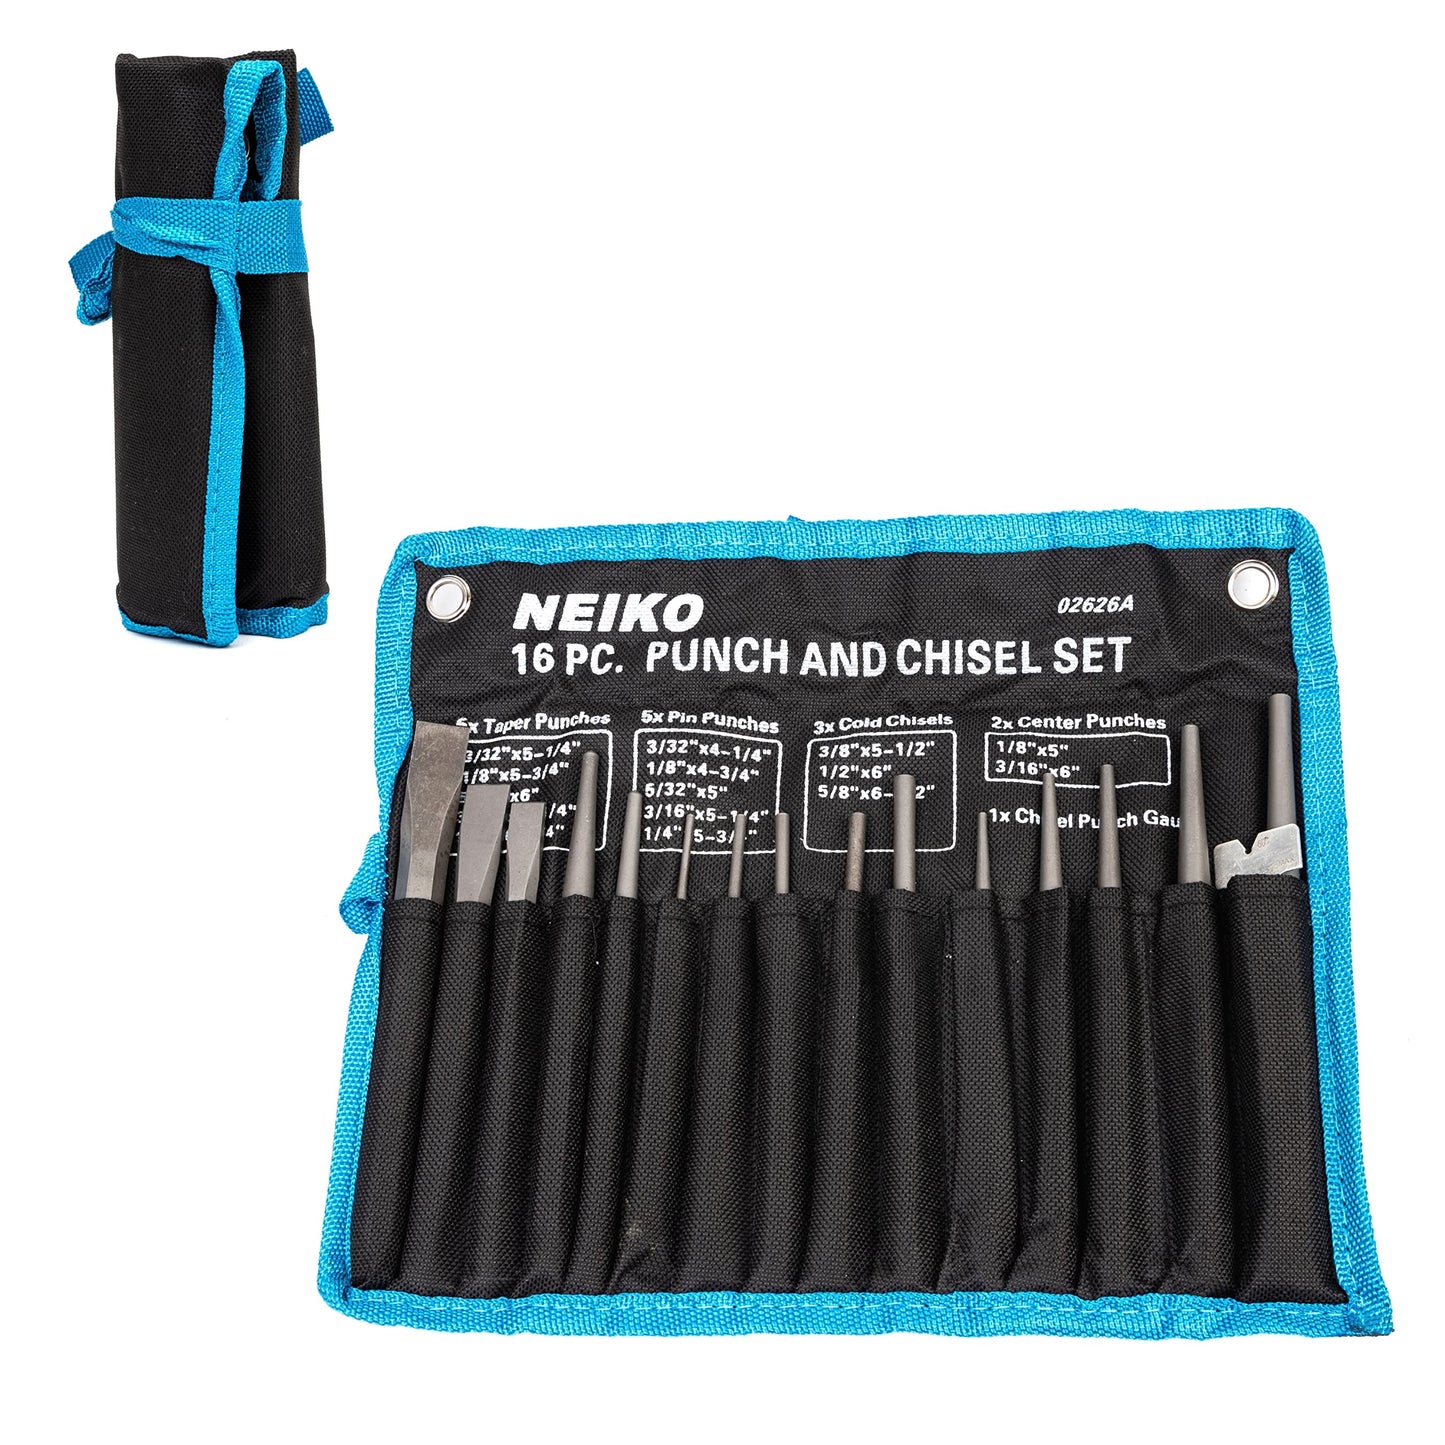 NEIKO 02626A Punch and Chisel Set | 16 Piece | Cold Chisels, Taper, Pin & Center Punches | Chrome Vanadium Steel | Roll Up Pouch | Chisel Tip Gauge |